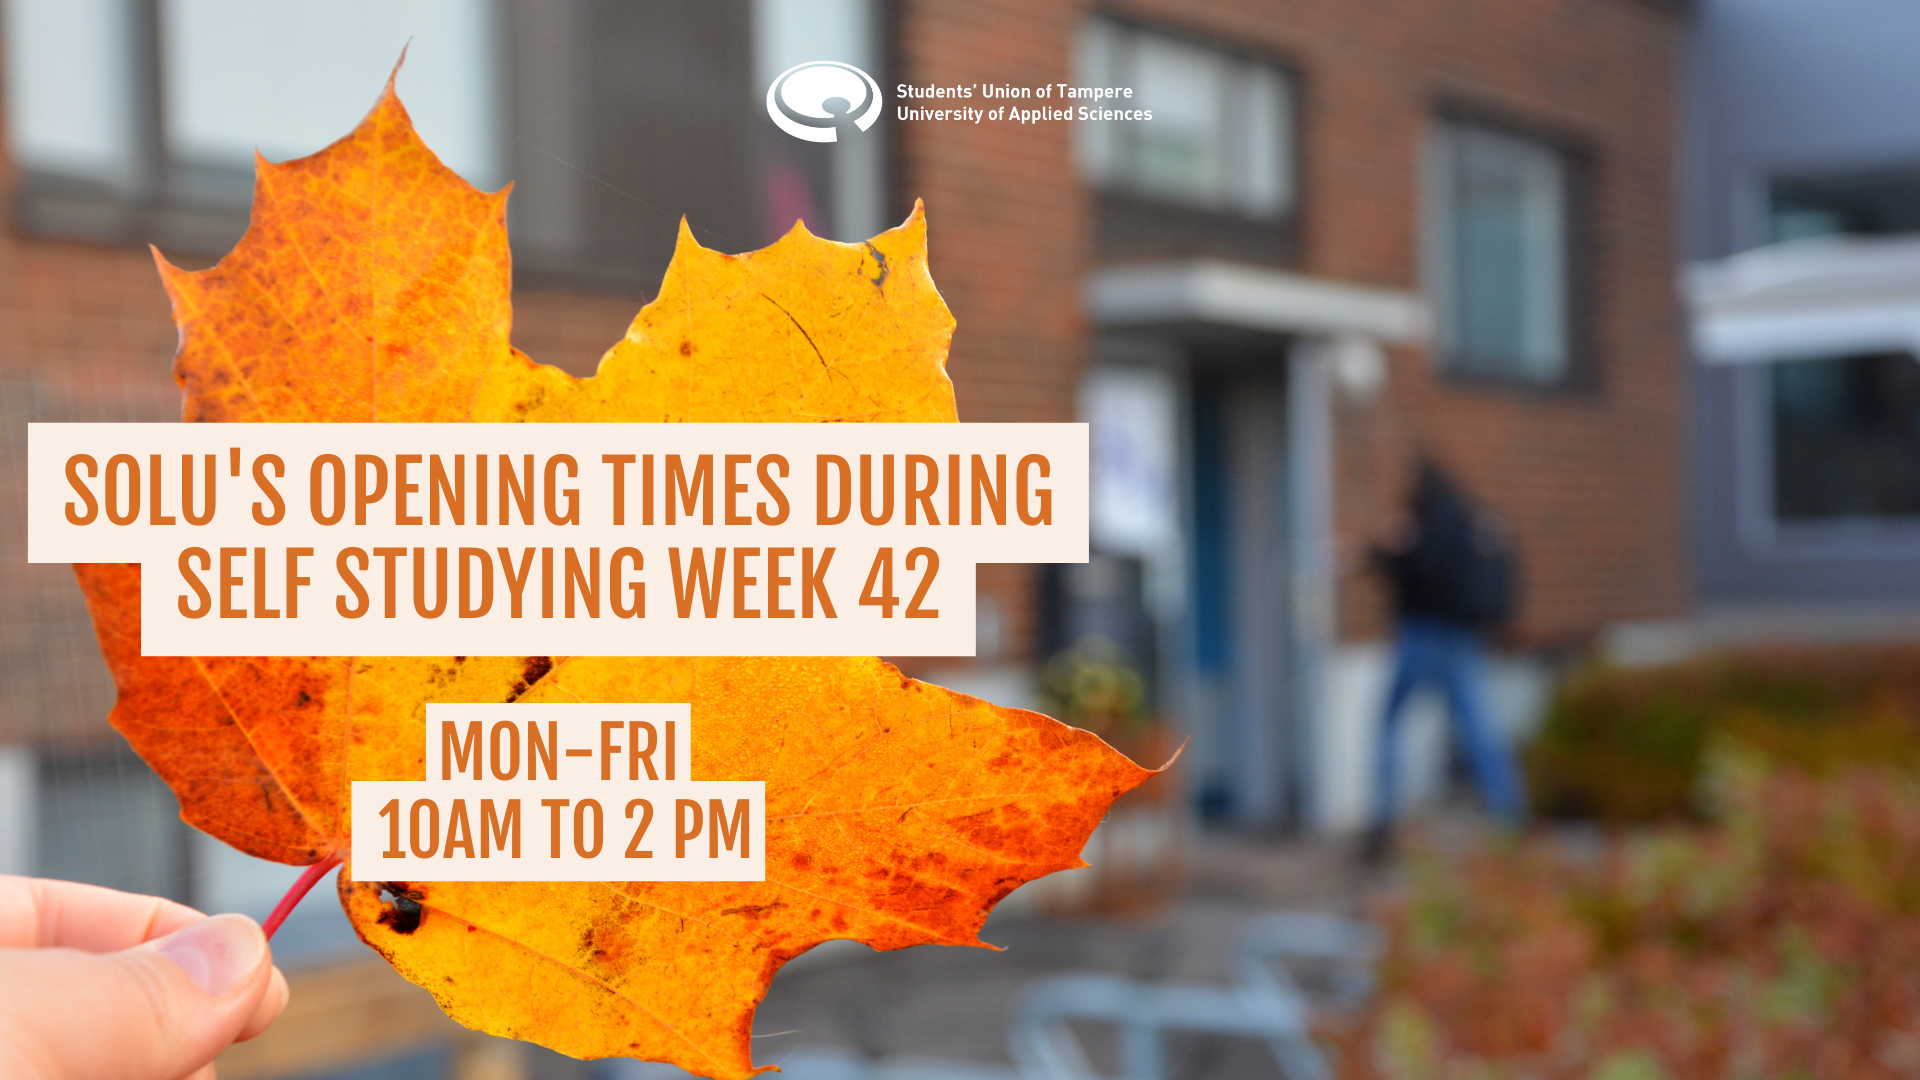 Solu’s opening times during self studying week 42